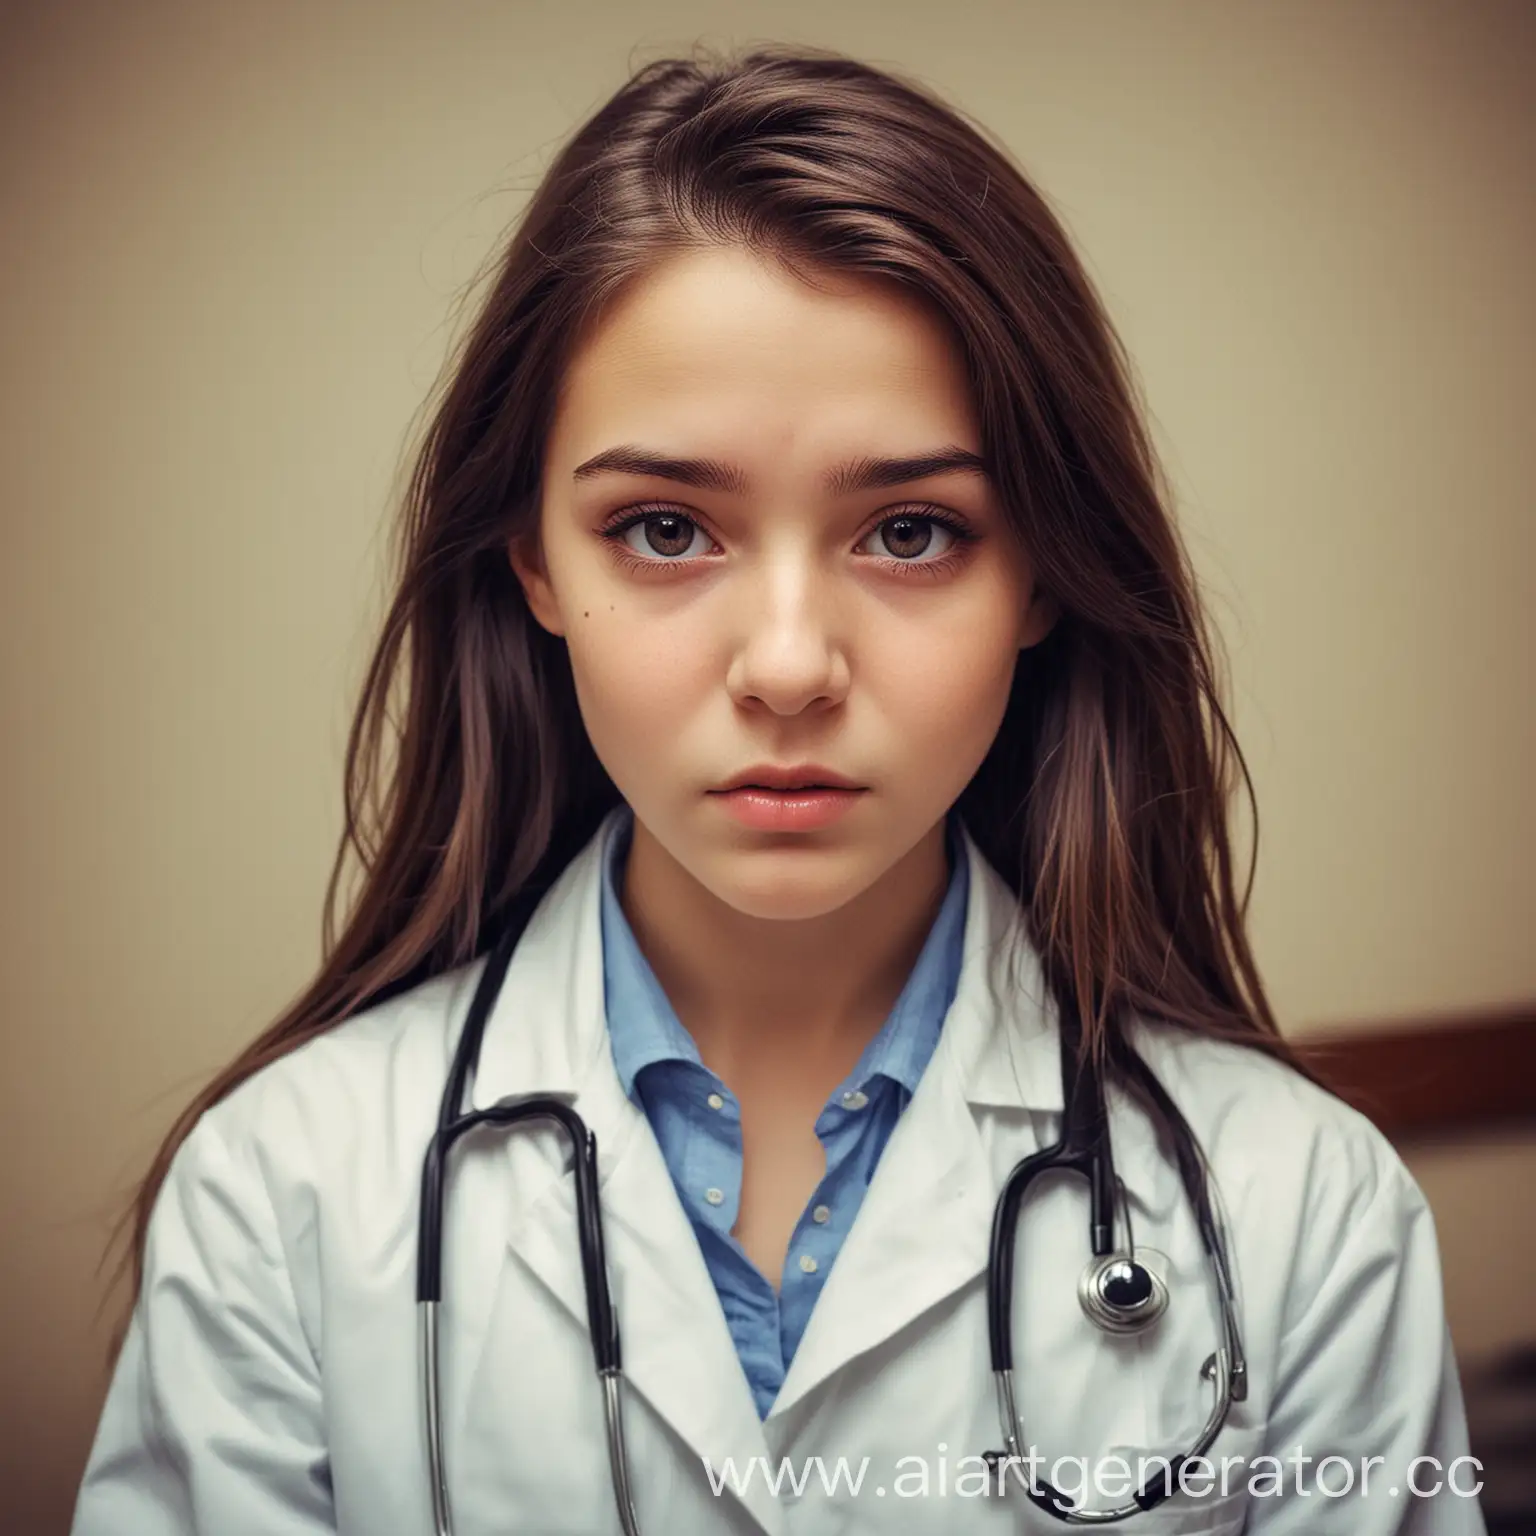 generate a picture of a girl who came to the doctor's appointment with weakness